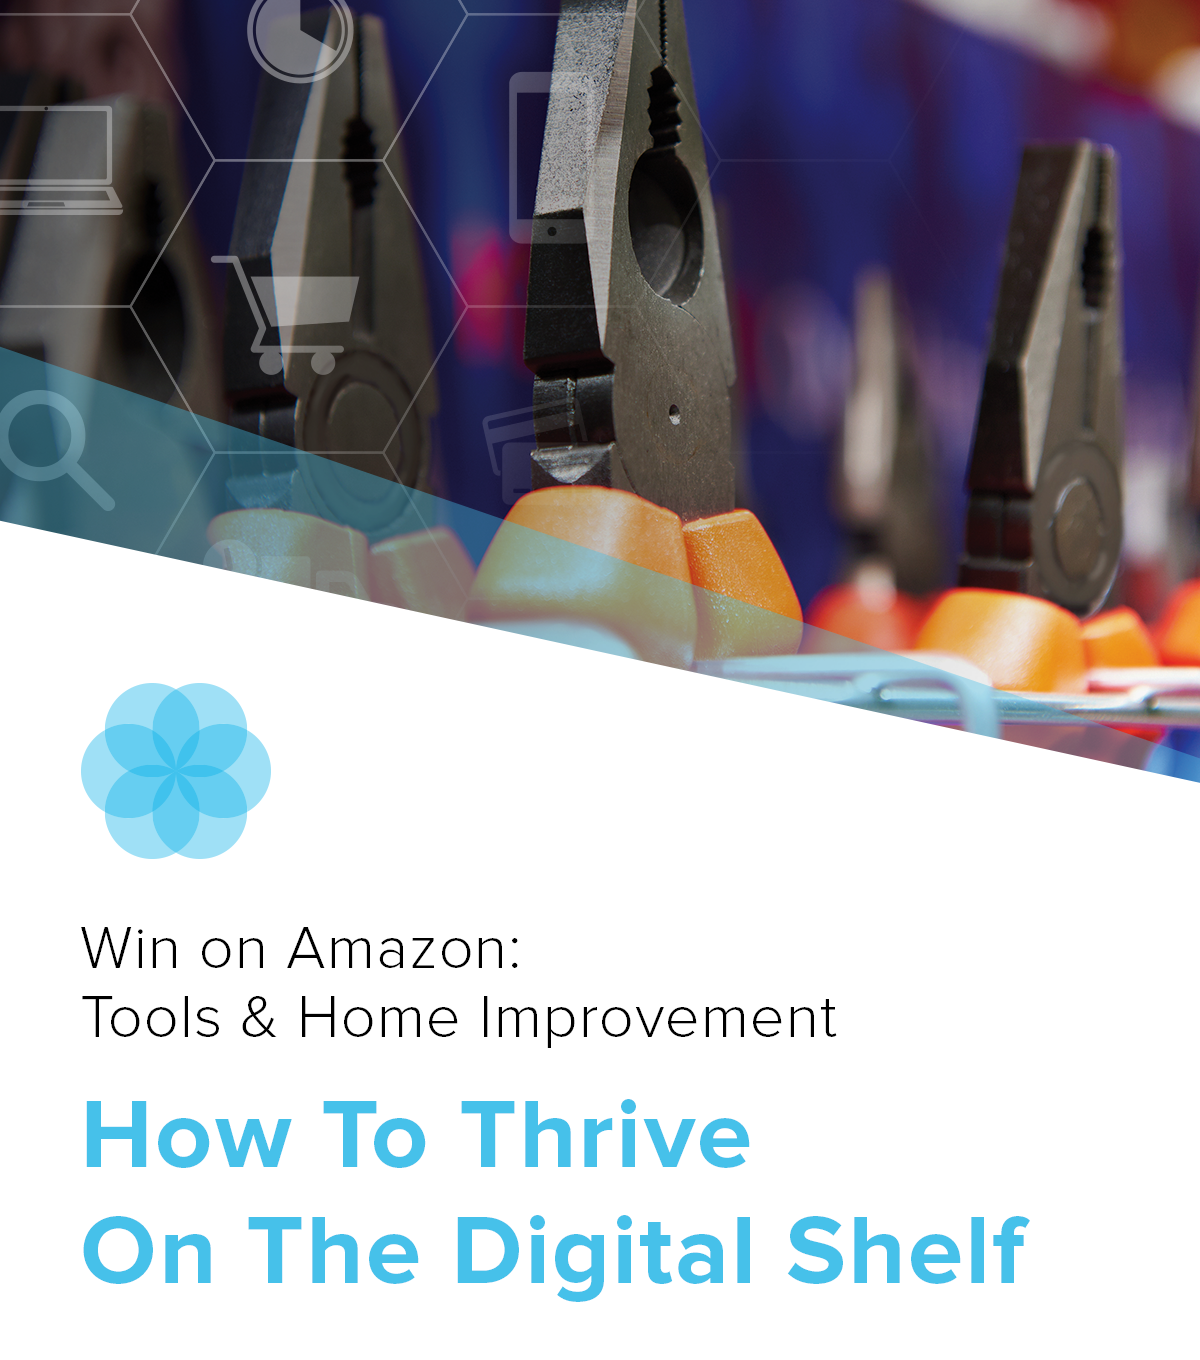 The Winning Elements of Tools & Home Improvement Product Pages